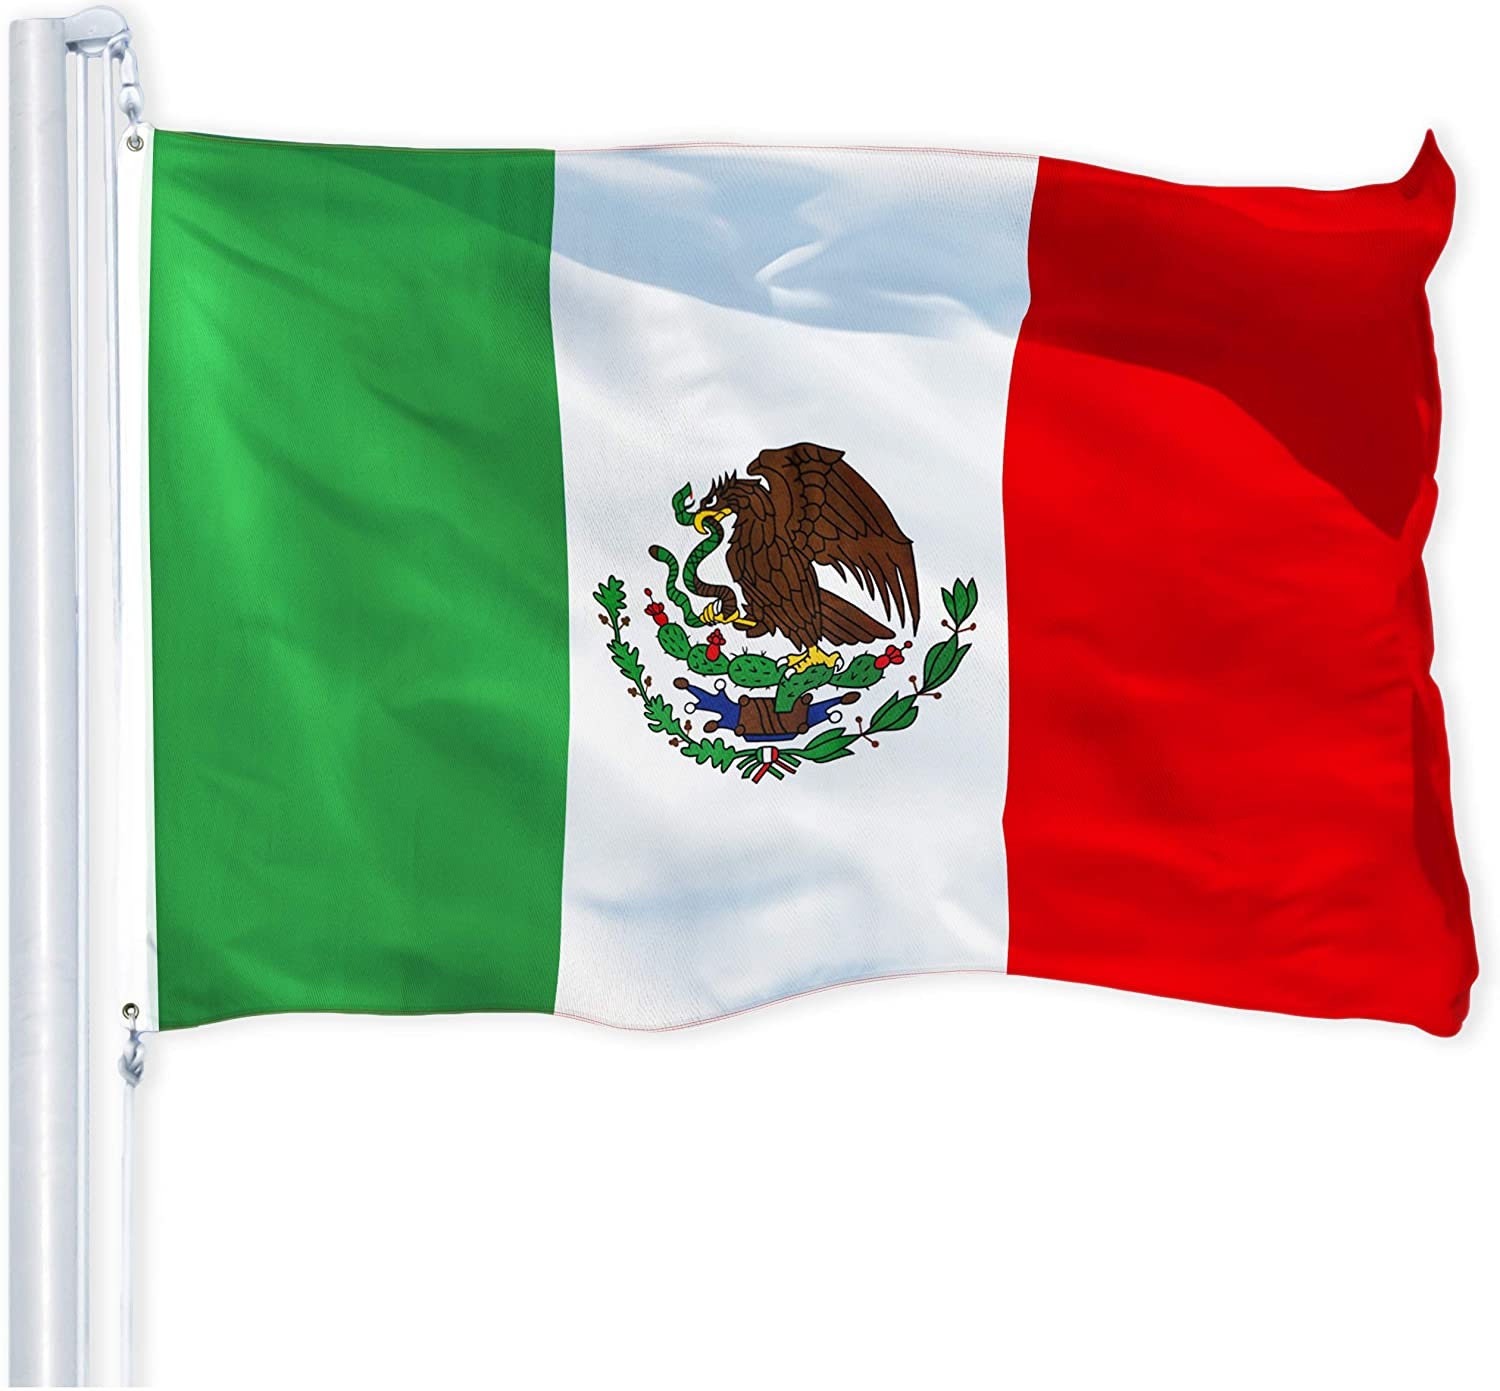 G128 Combo Pack USA American Flag 3x5 ft 75D Printed Stars & Mexico Mexican Flag 3x5 ft 75D Printed